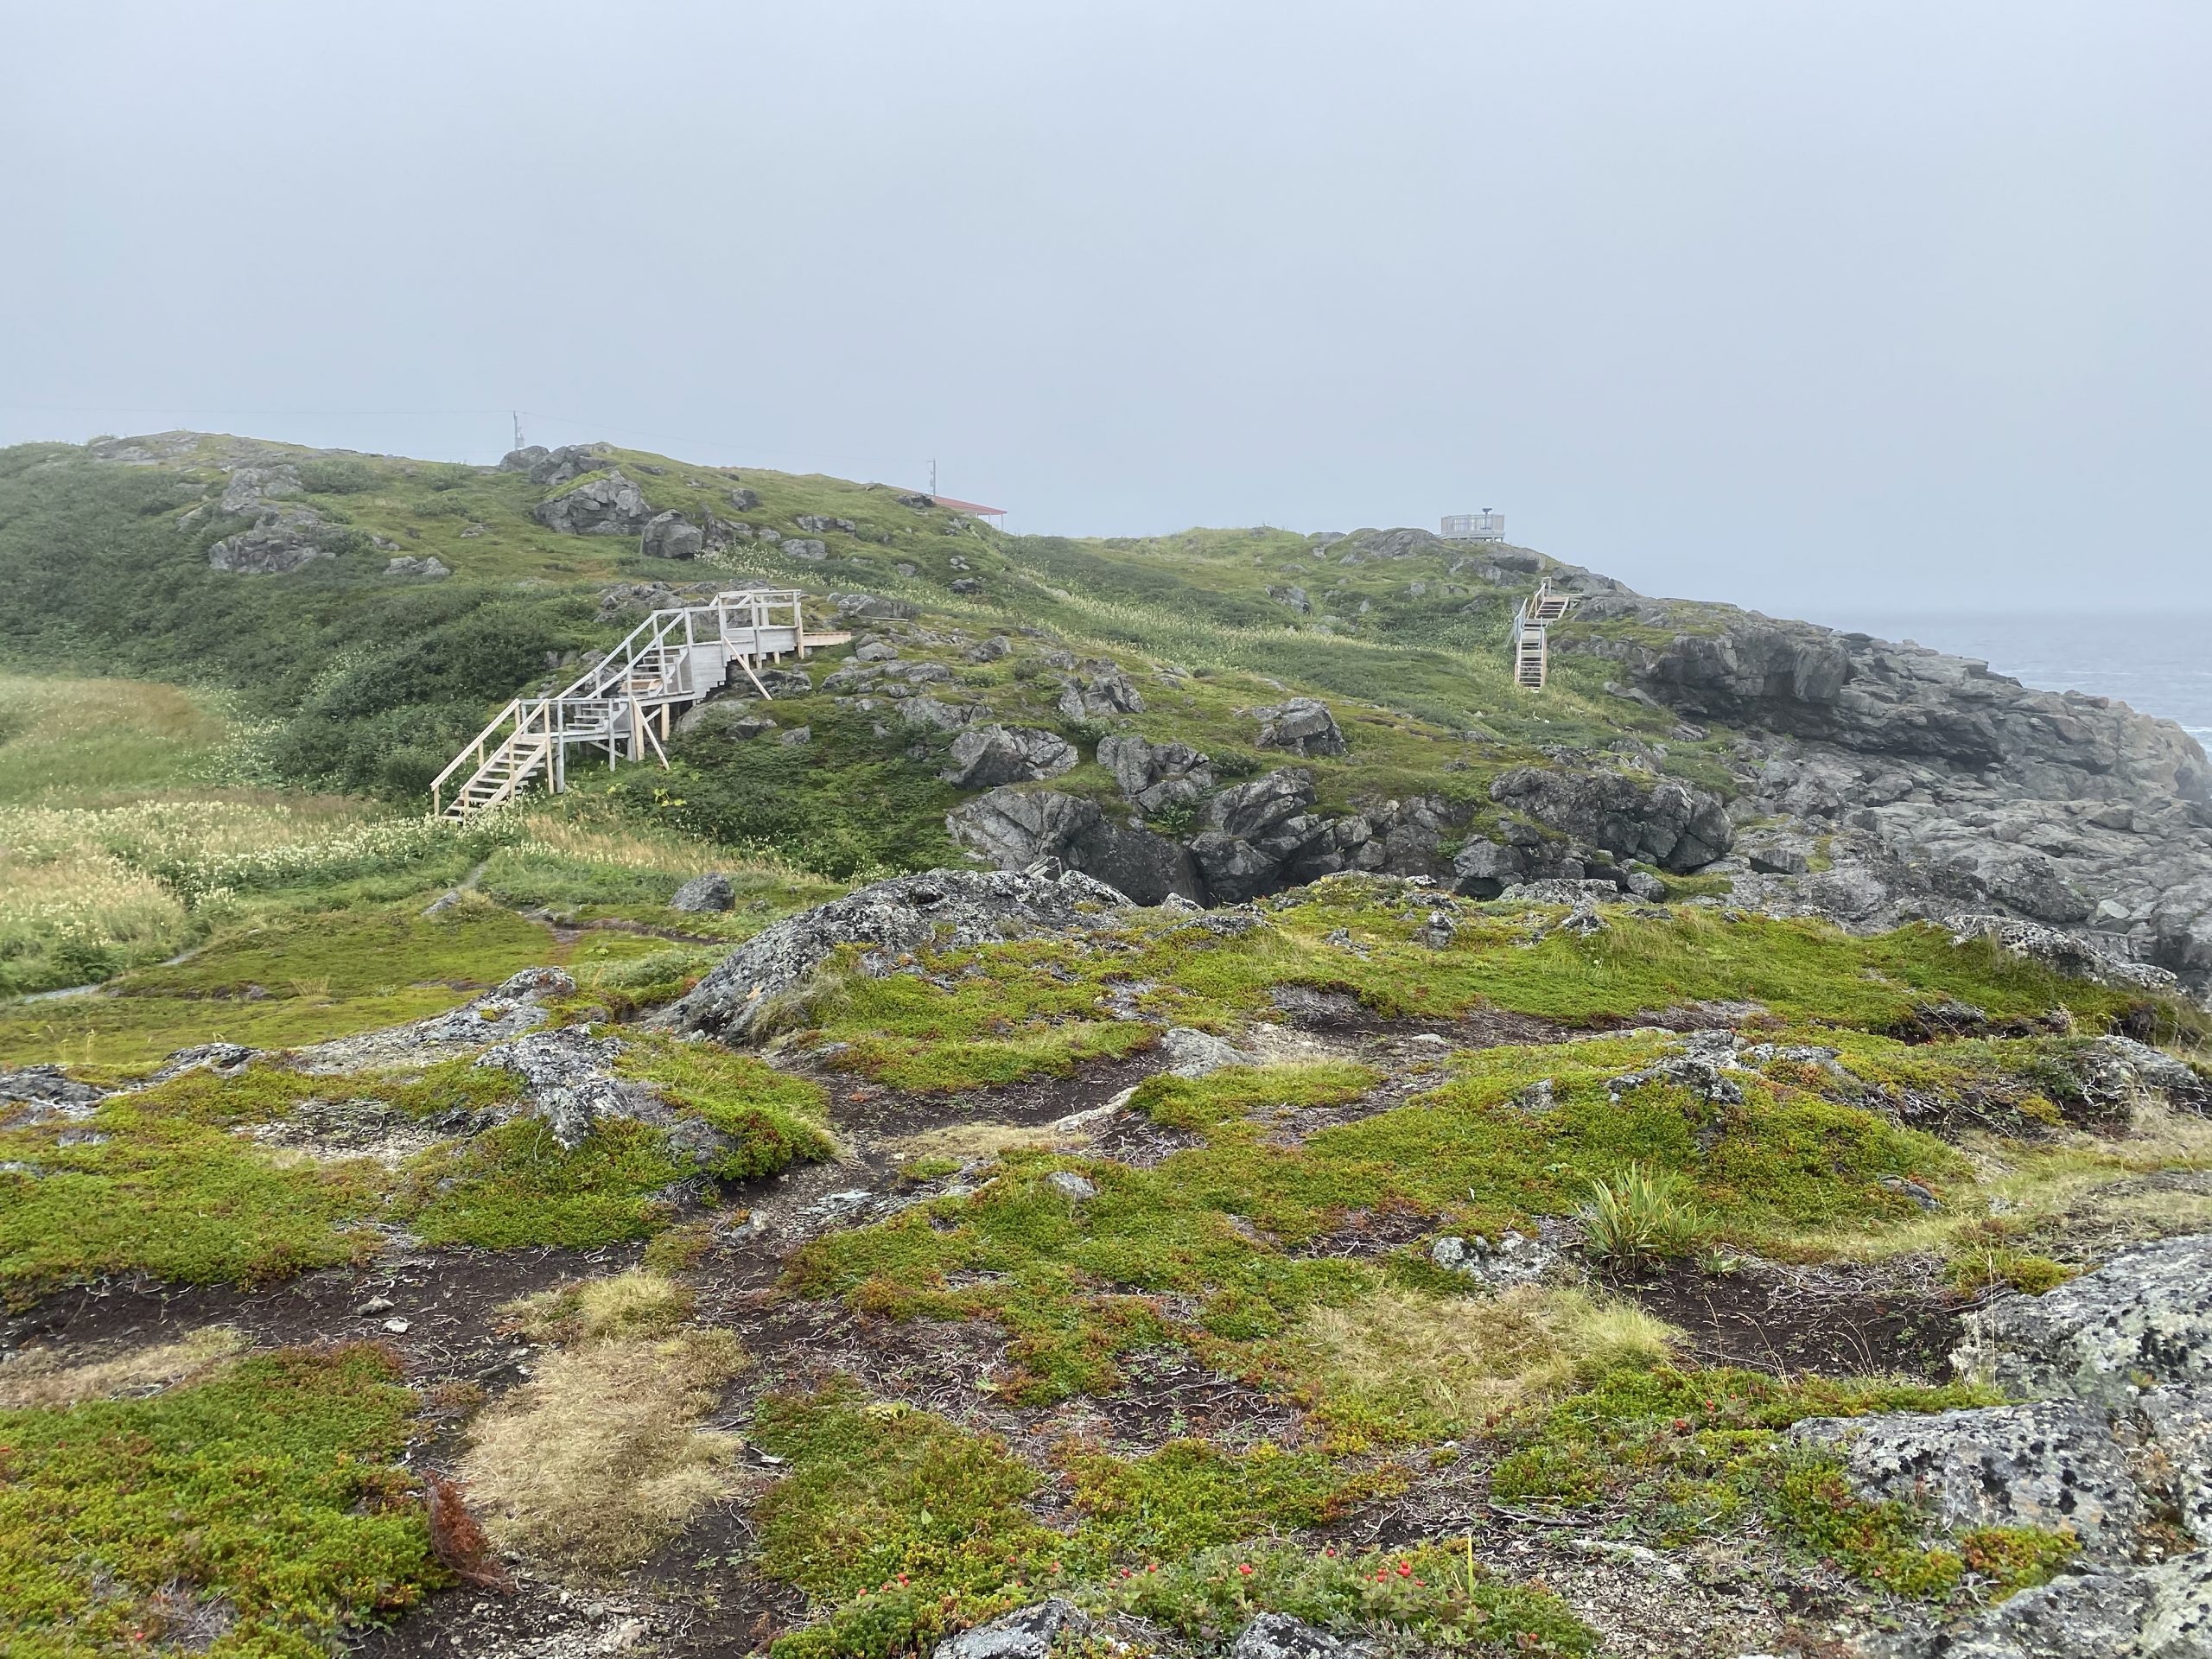 The shoreline path at Fox Point (or Fisherman’s Point) near St. Anthony, Newfoundland.